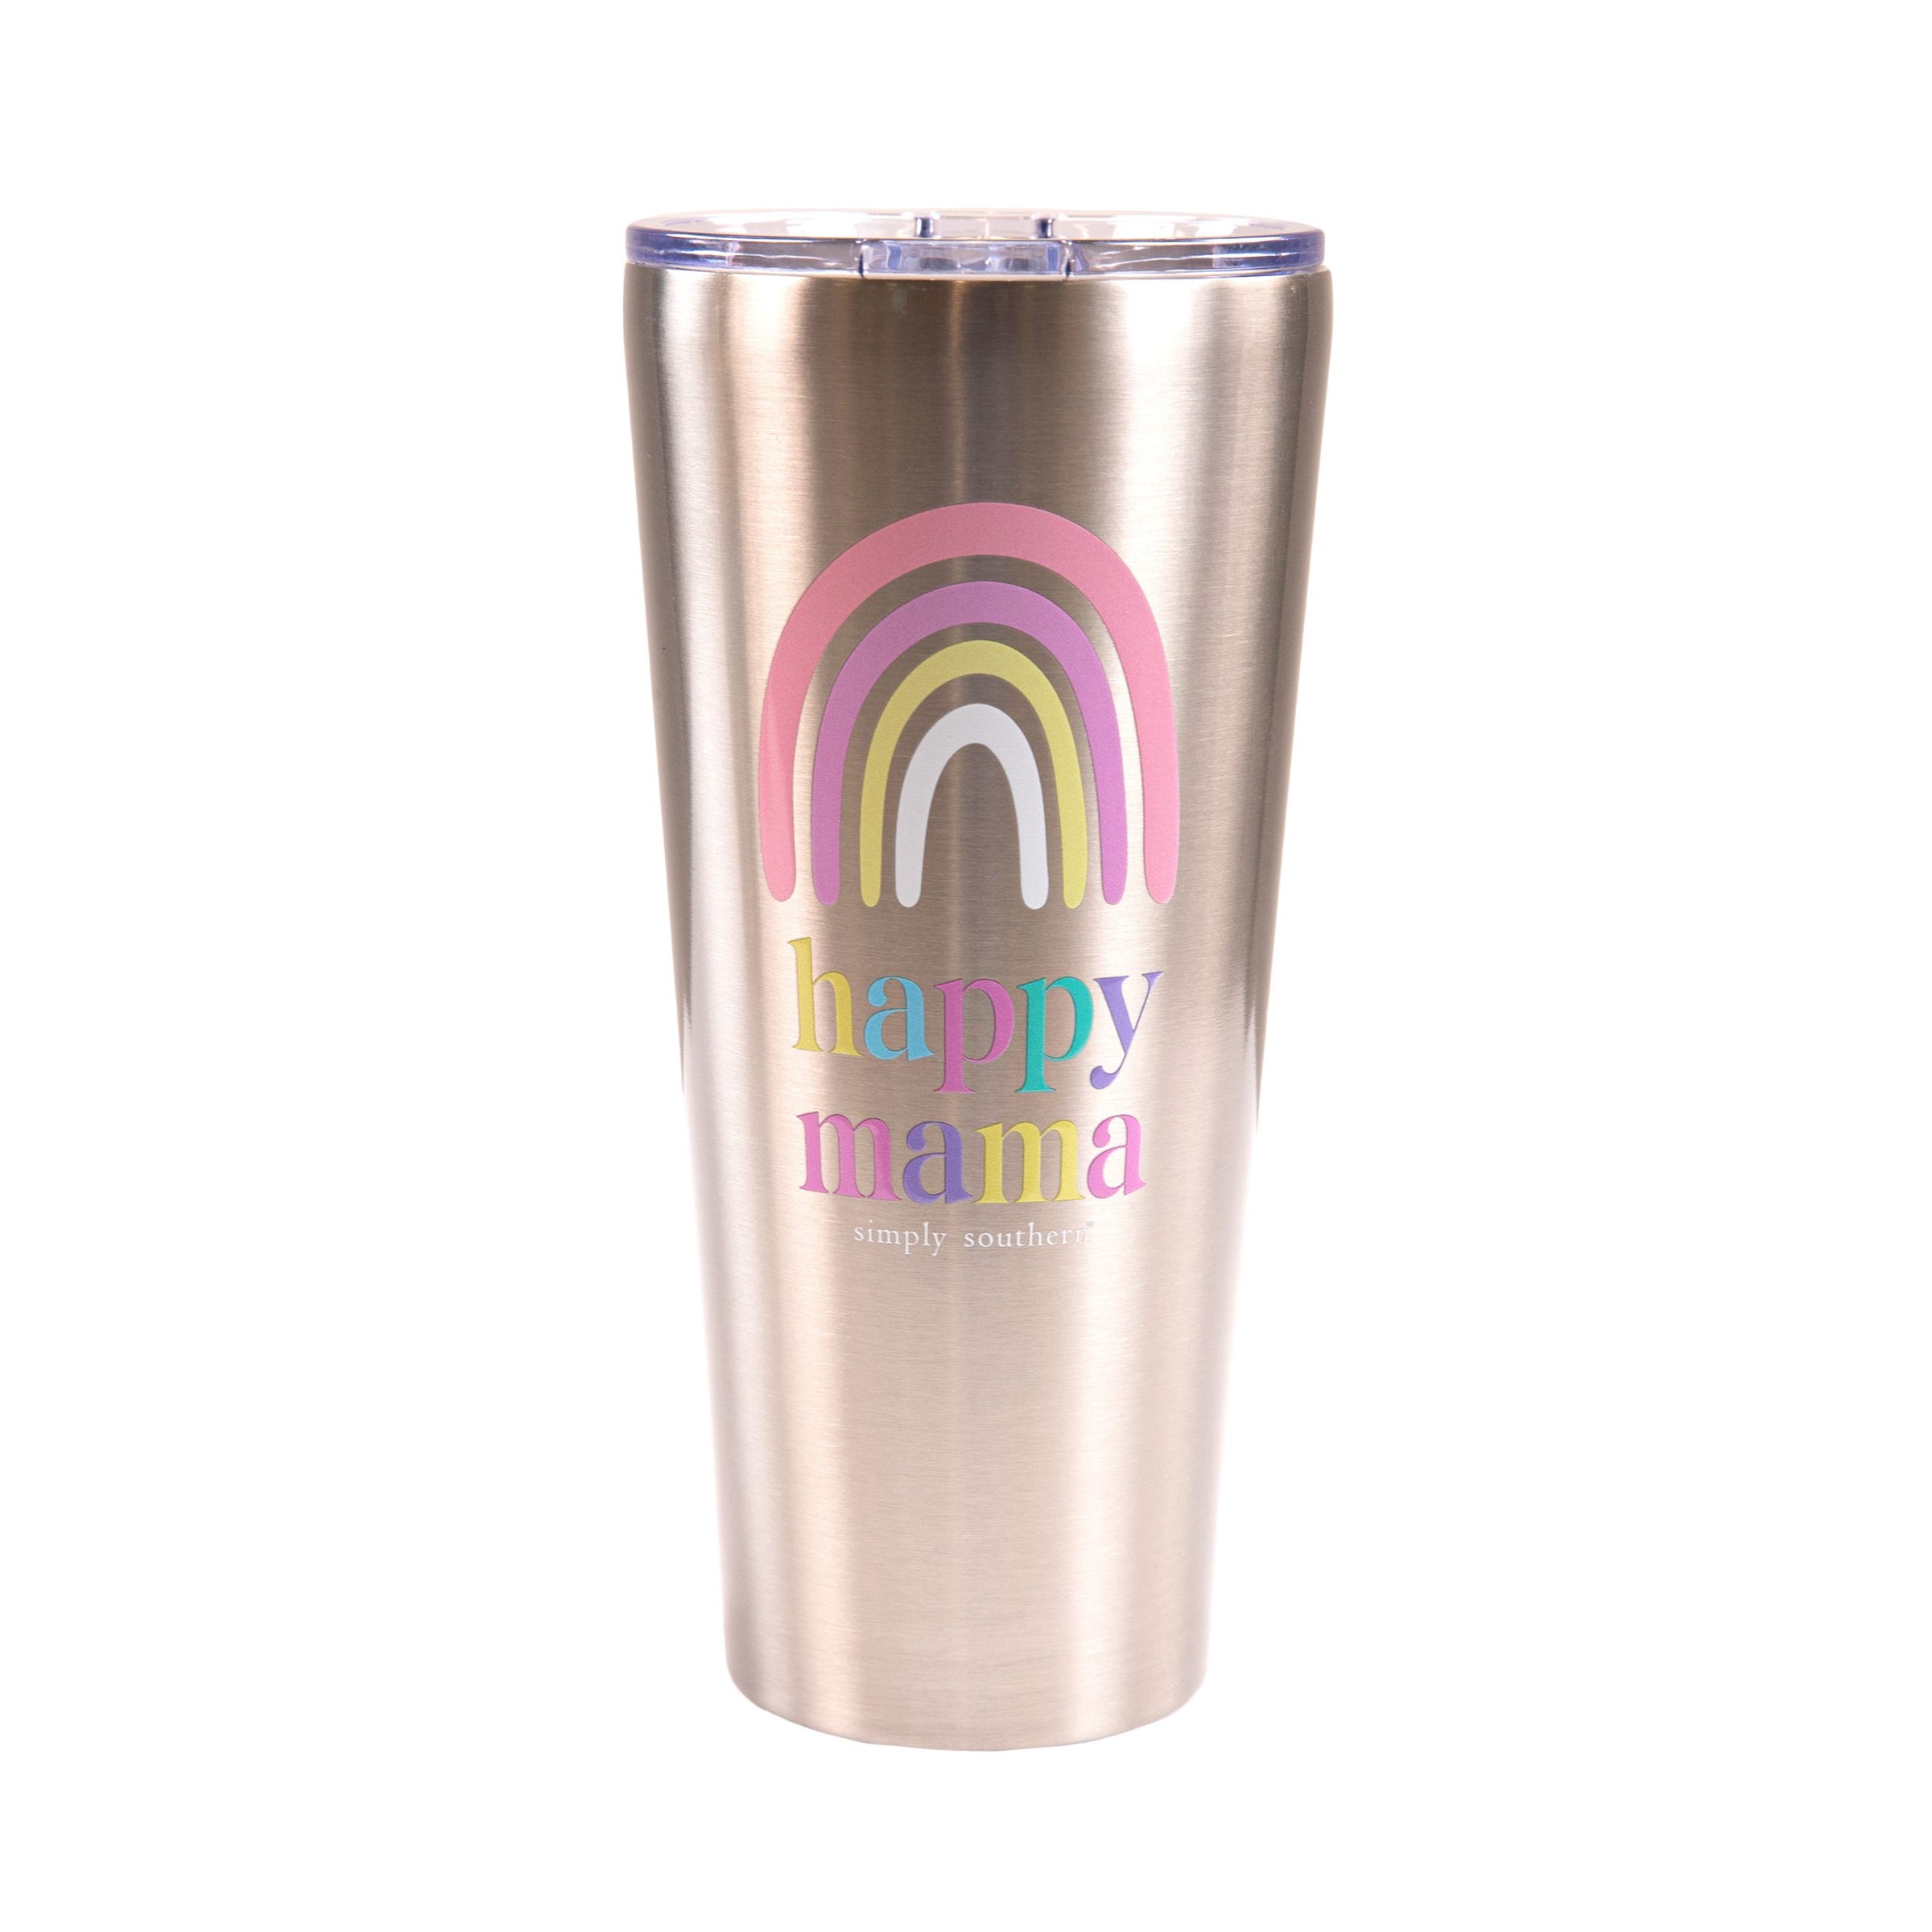 Always Be Blooming Tumbler by Simply Southern 0123-TUMBLER30DESIGN-BLOOM